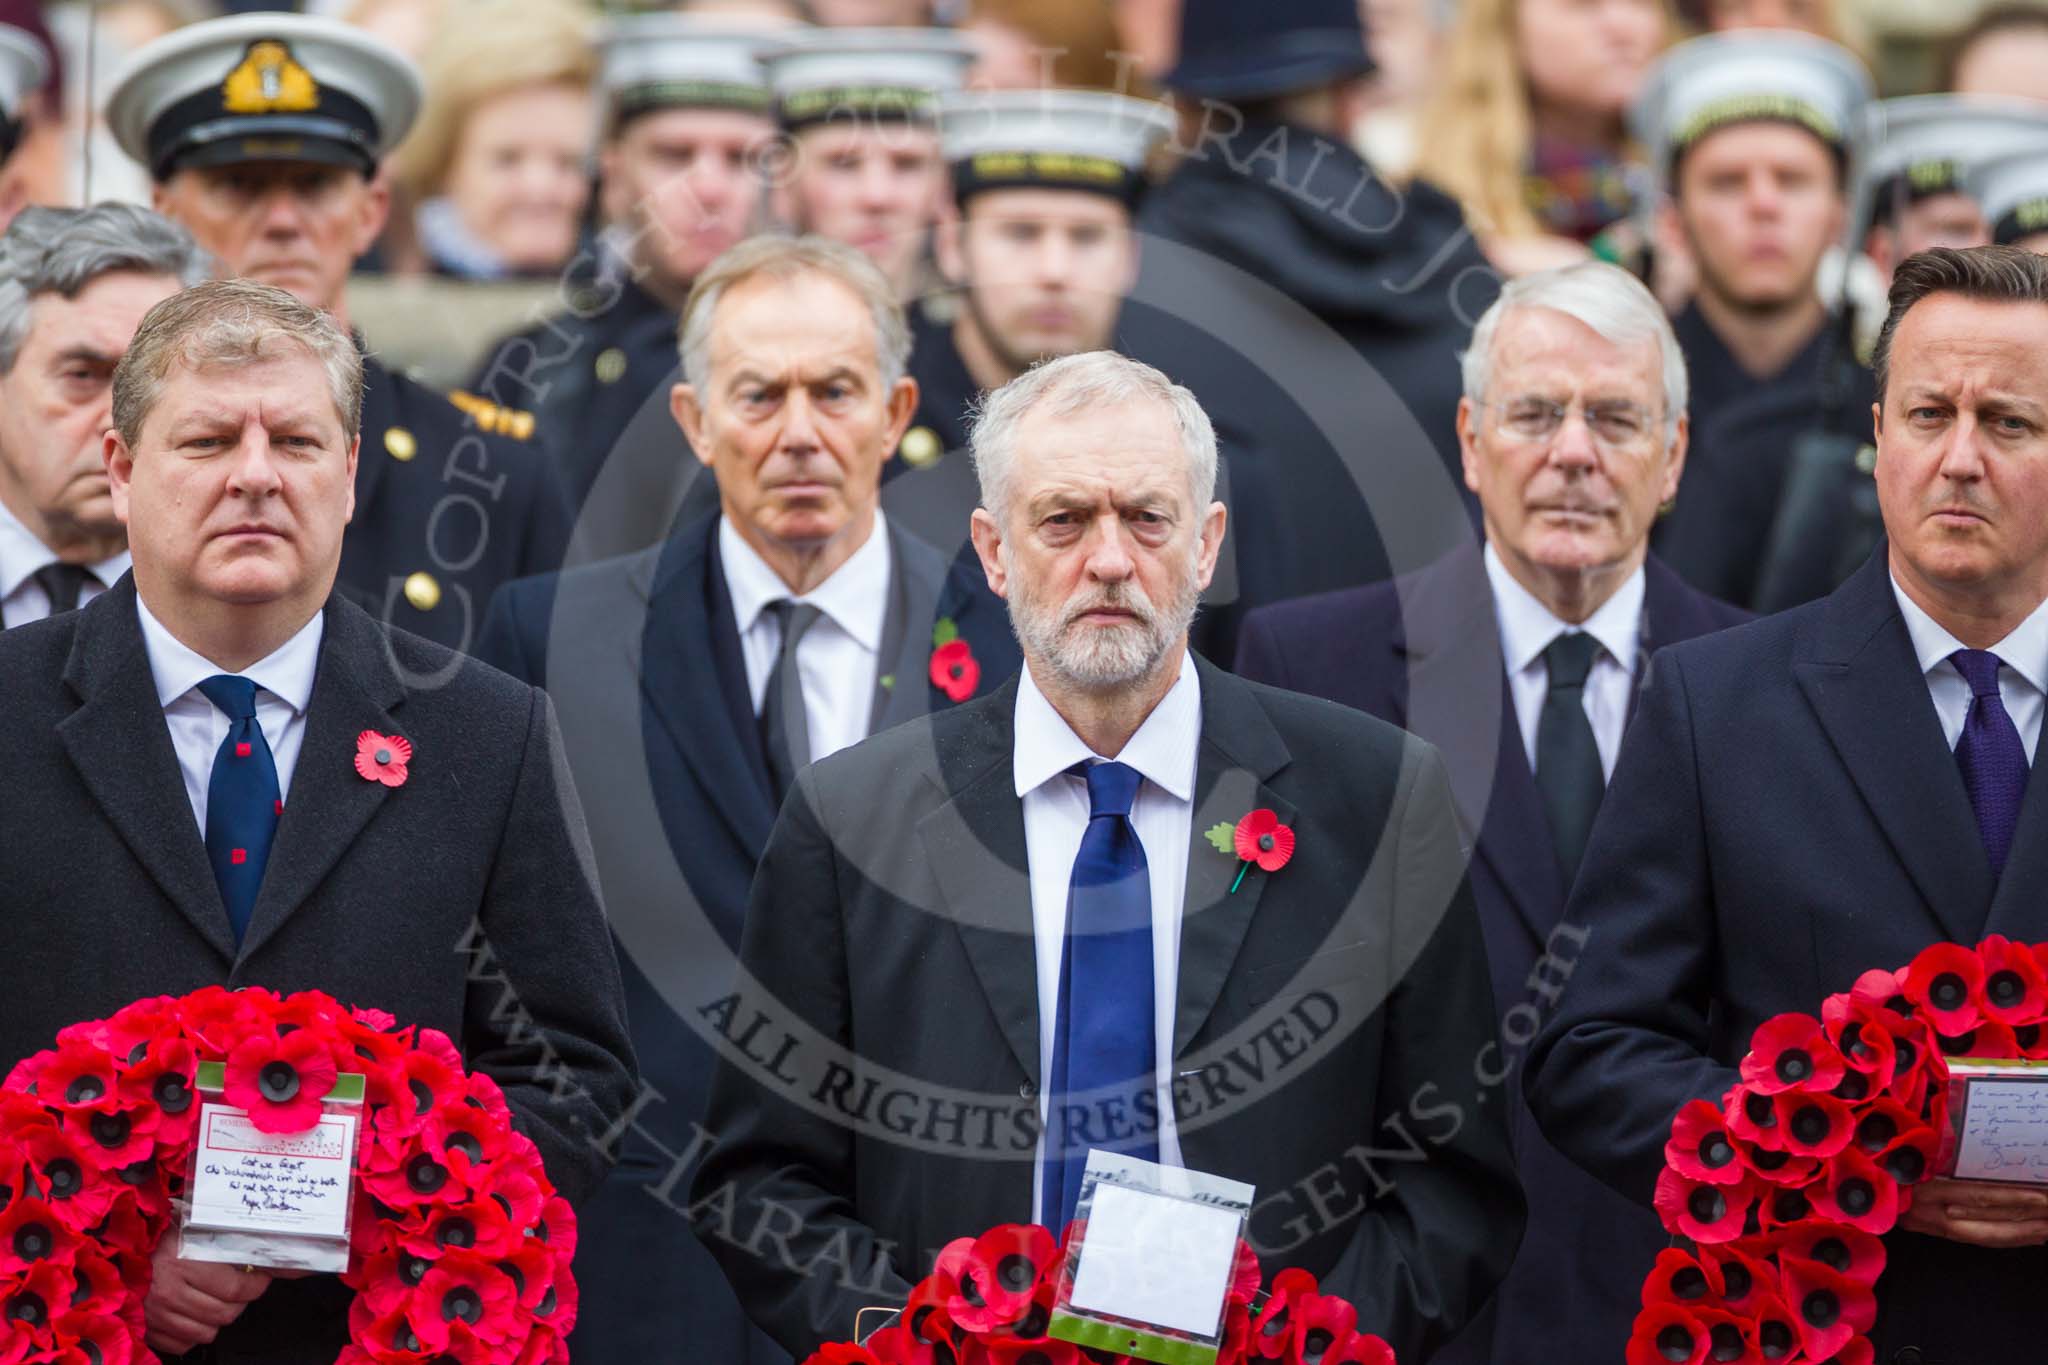 Remembrance Sunday at the Cenotaph 2015: The Westminster Leader of the Scottish National Party, Angus Robertson, the Leader of the Opposition, Jeremy Corbyn, and the Prime Minister, David Cameron. Behind them former prime ministers Gordon Brown,  Tony Blair and John Major. Image #157, 08 November 2015 11:02 Whitehall, London, UK